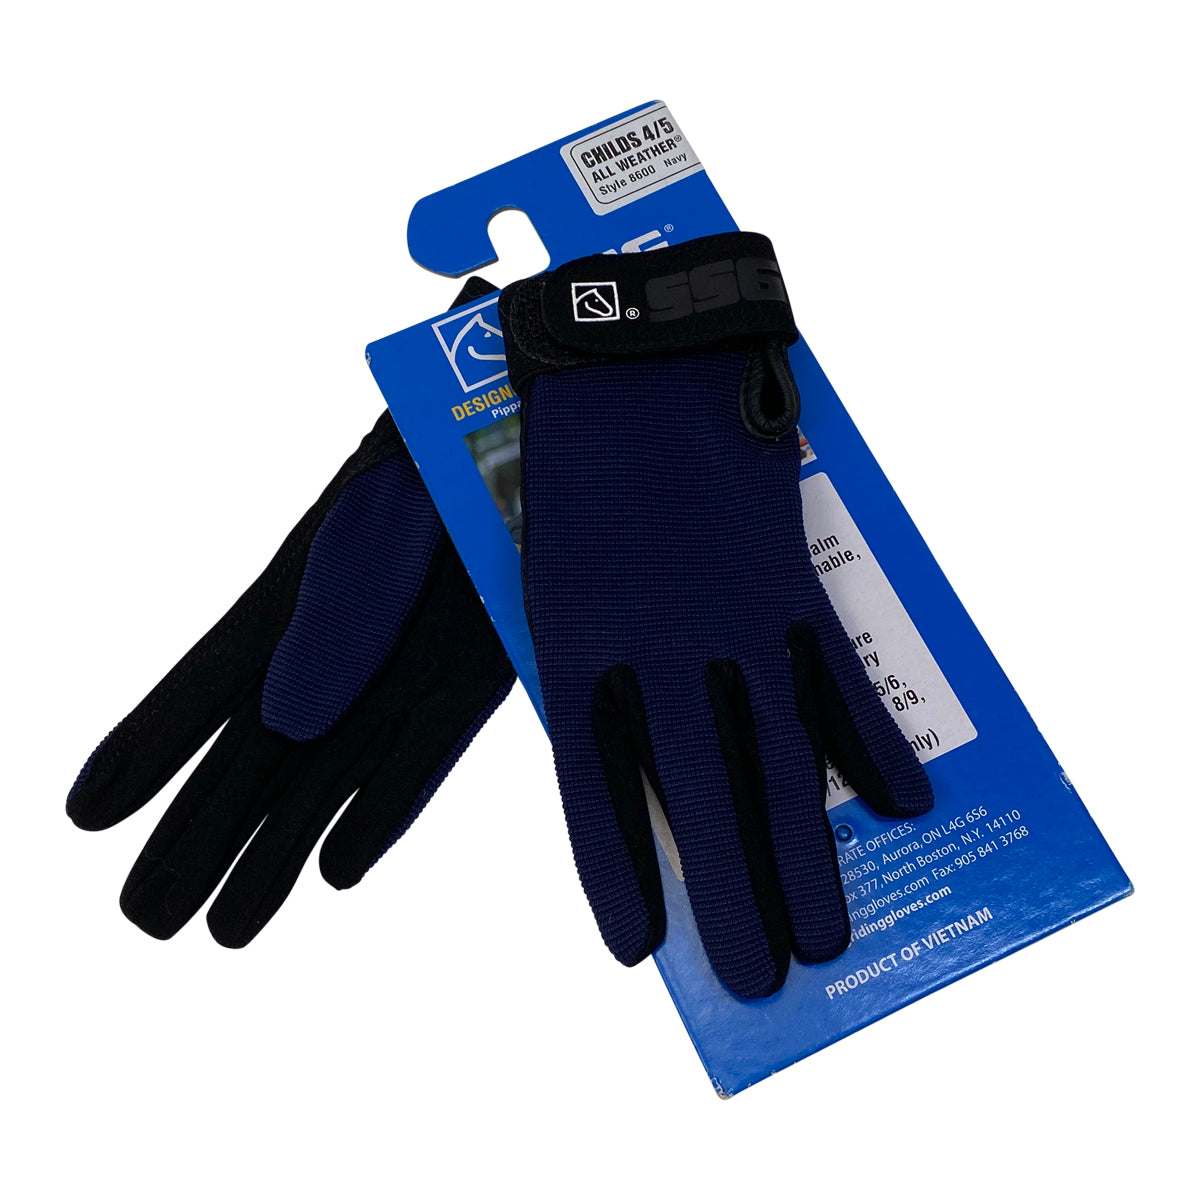 SSG All Weather Riding Gloves in Navy